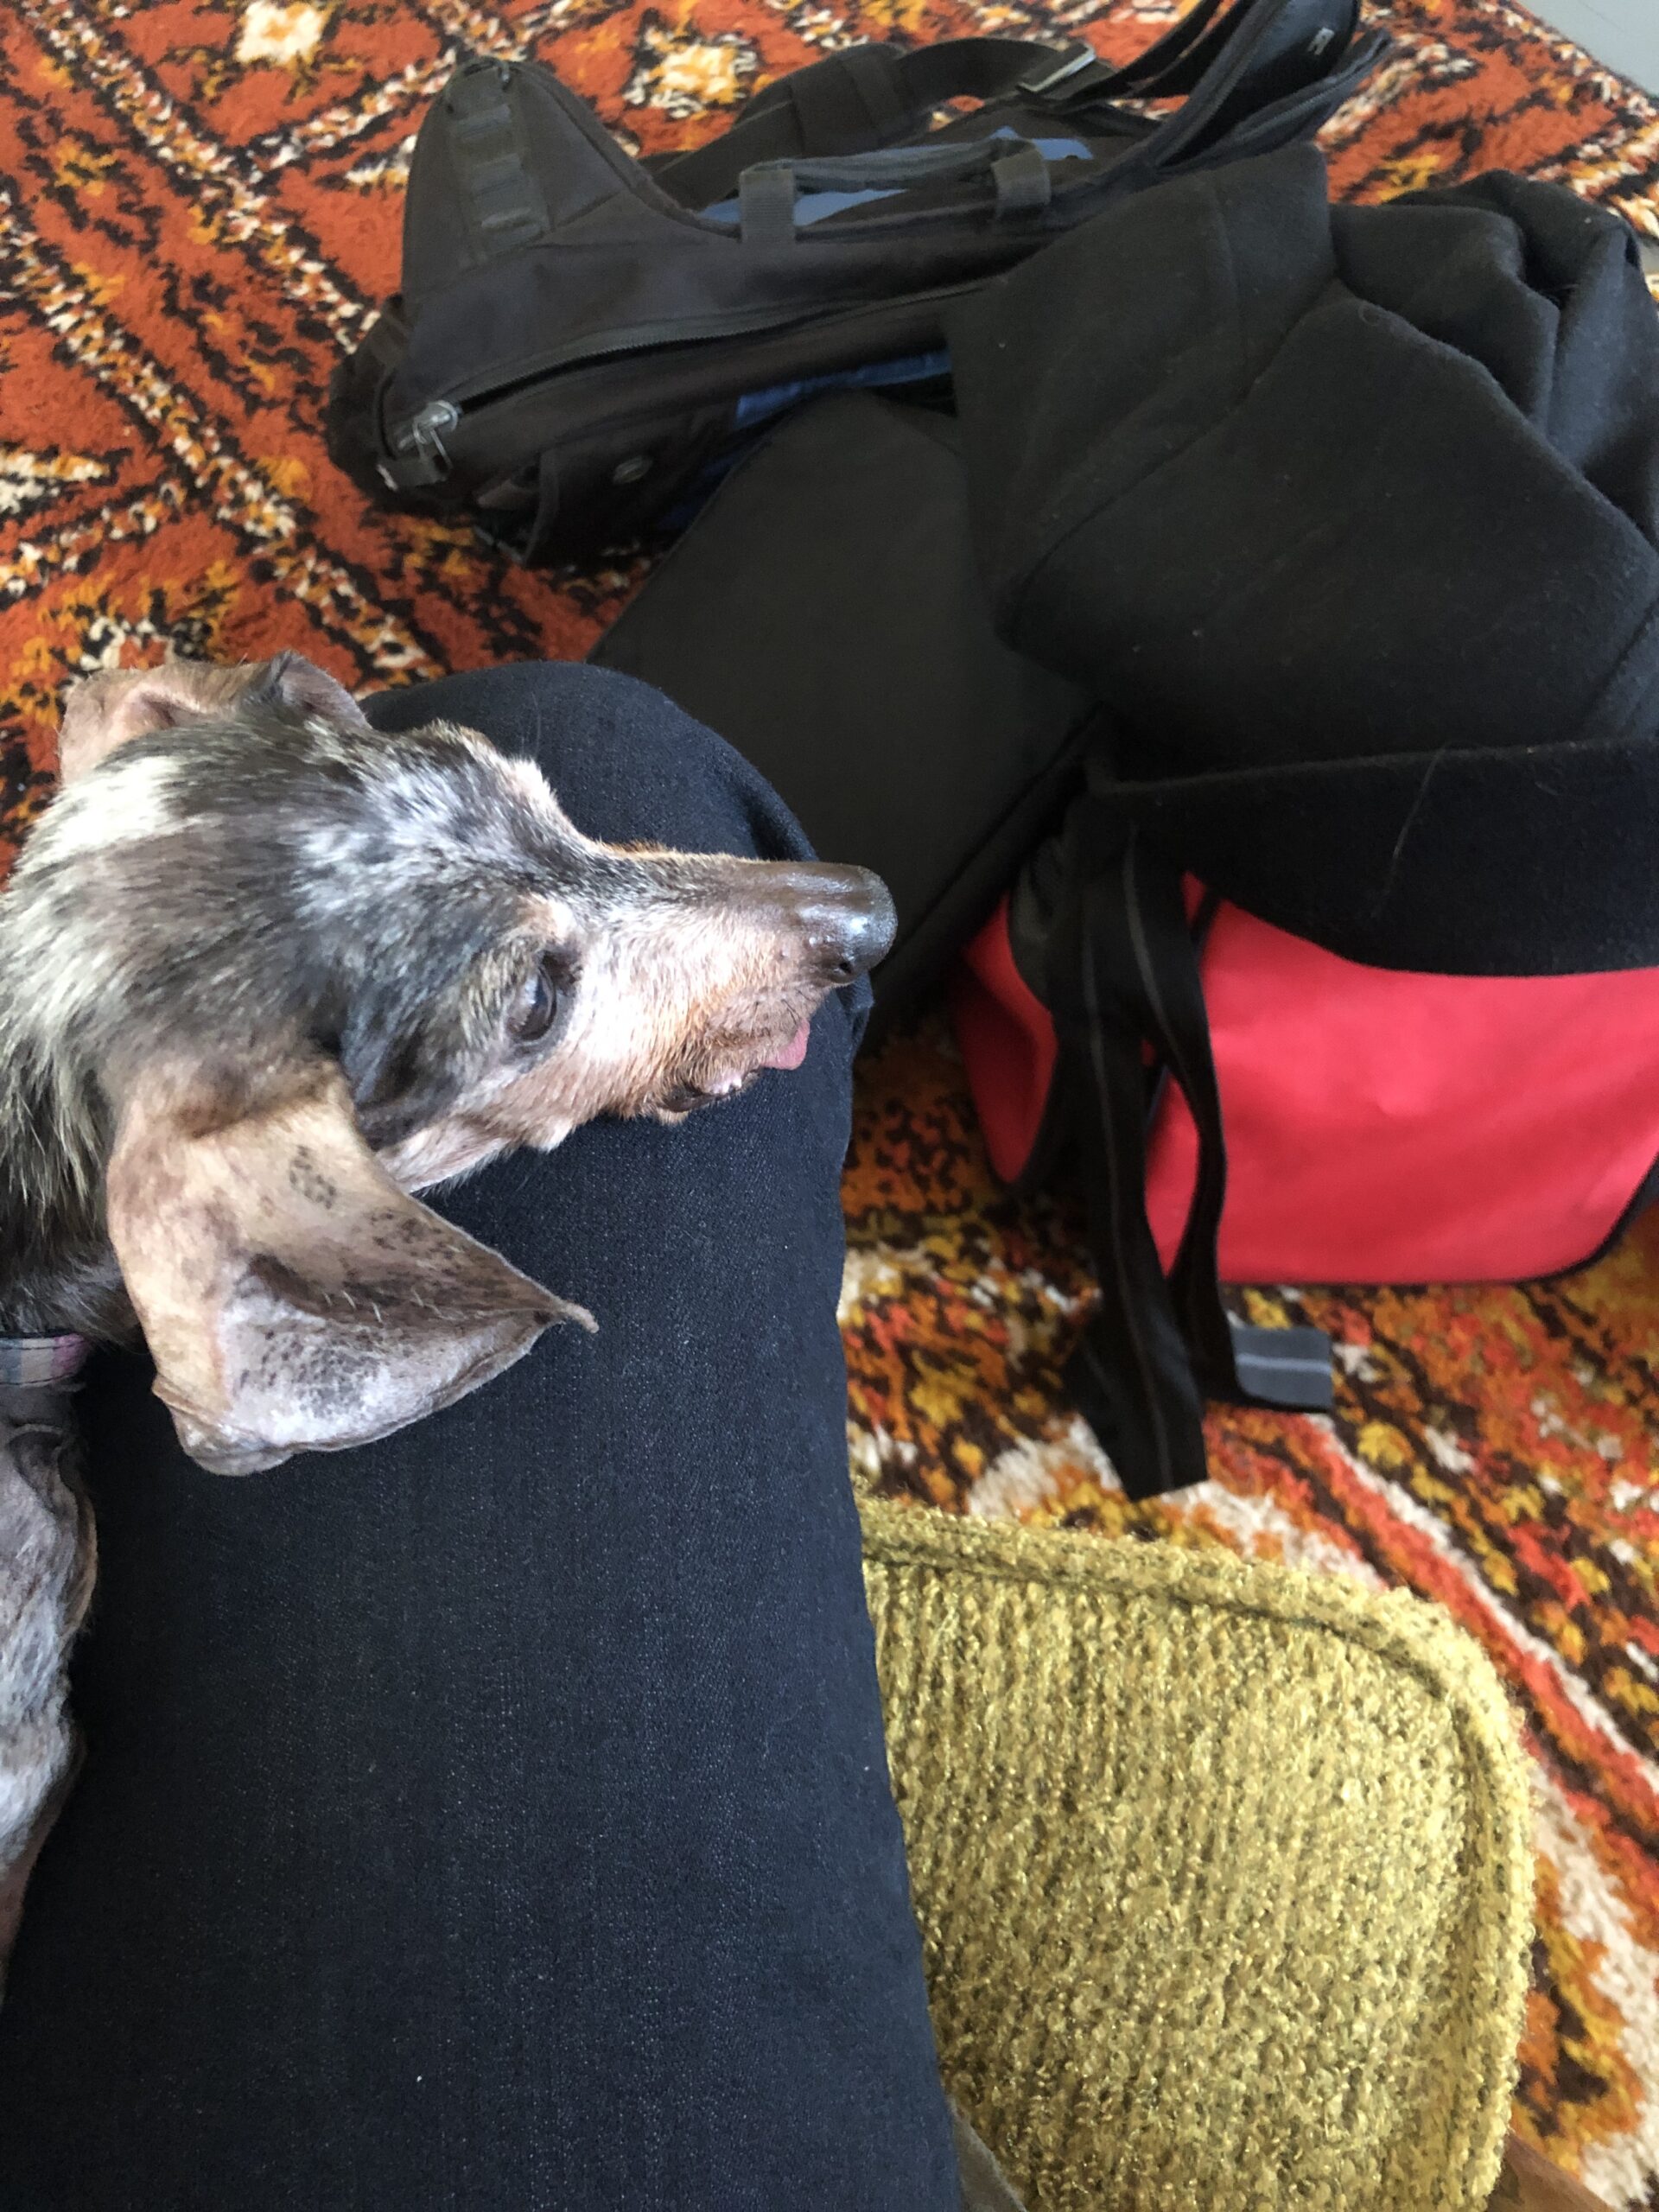 Dog resting on human's leg, with travel bags at her feet.